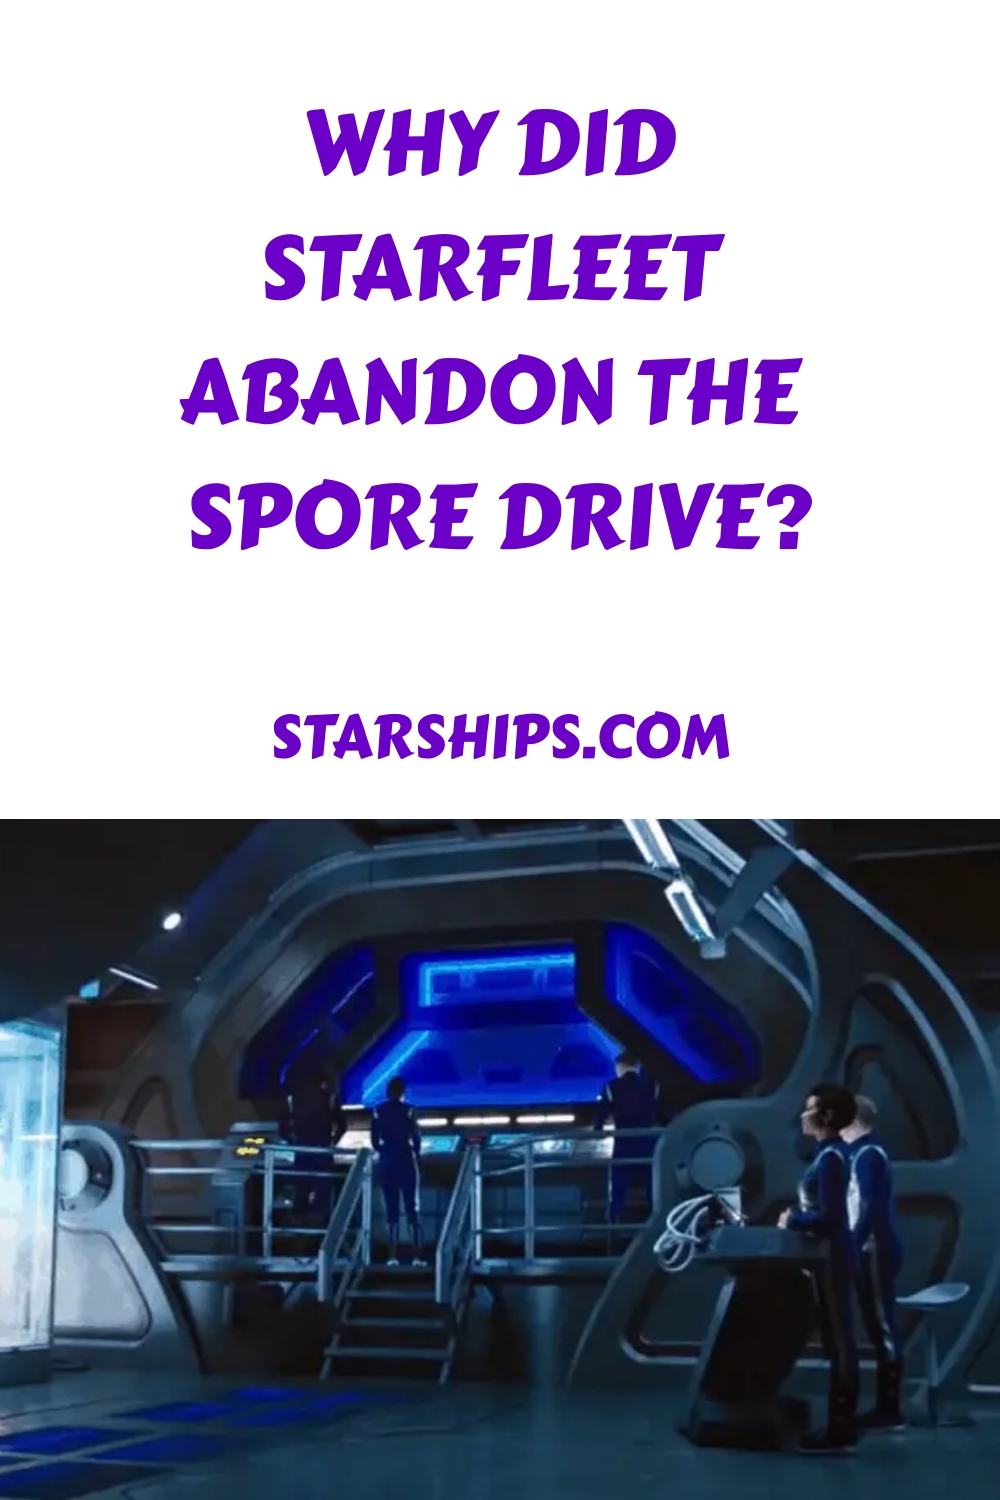 Why Did Starfleet Abandon the Spore Drive generated pin 56376